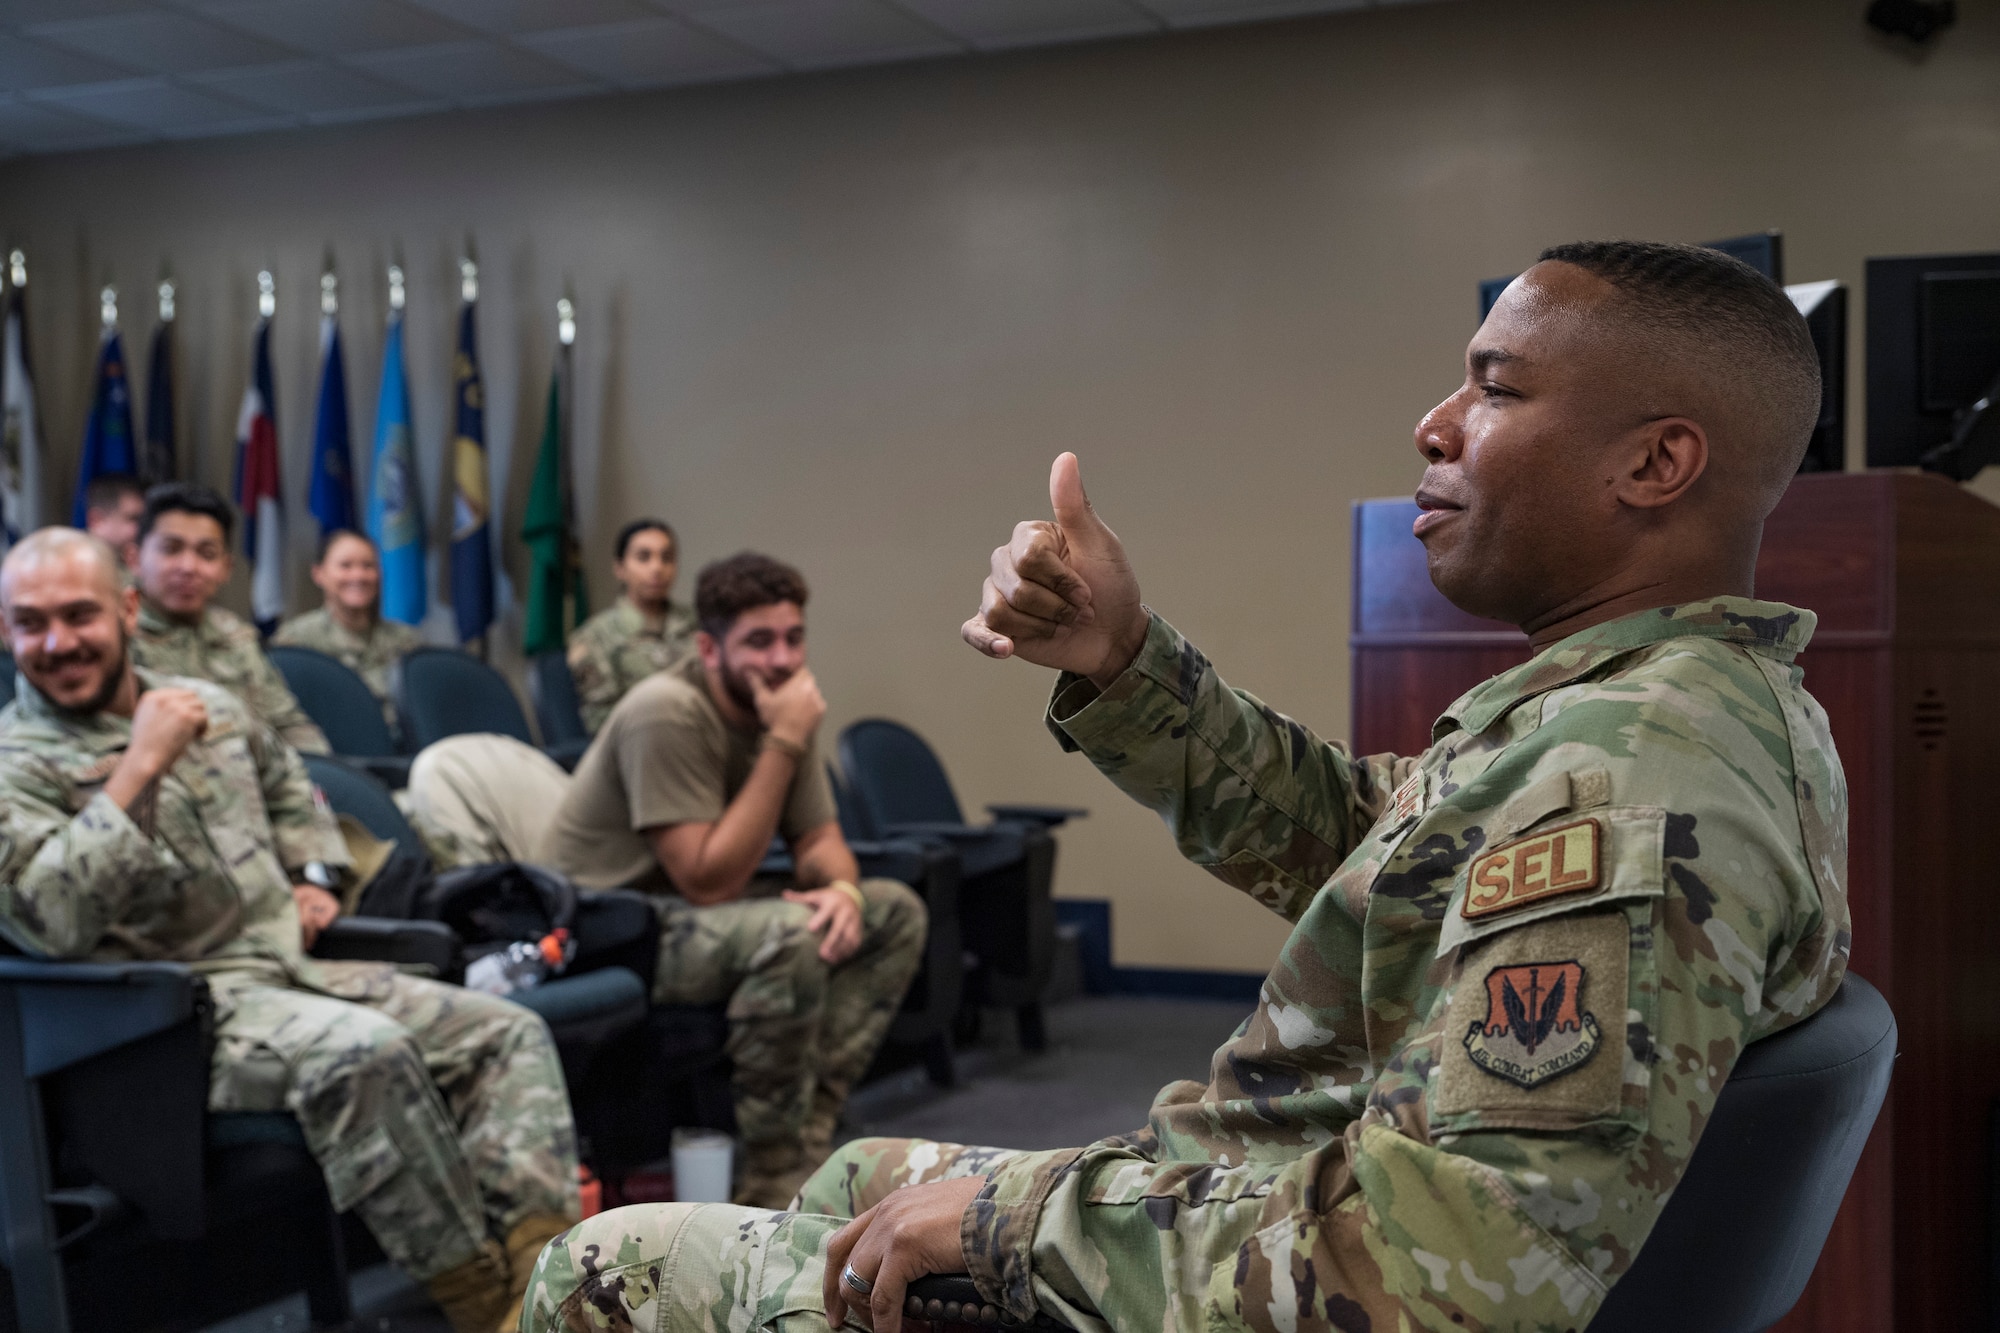 A photo of an airmen giving a thumbs up.